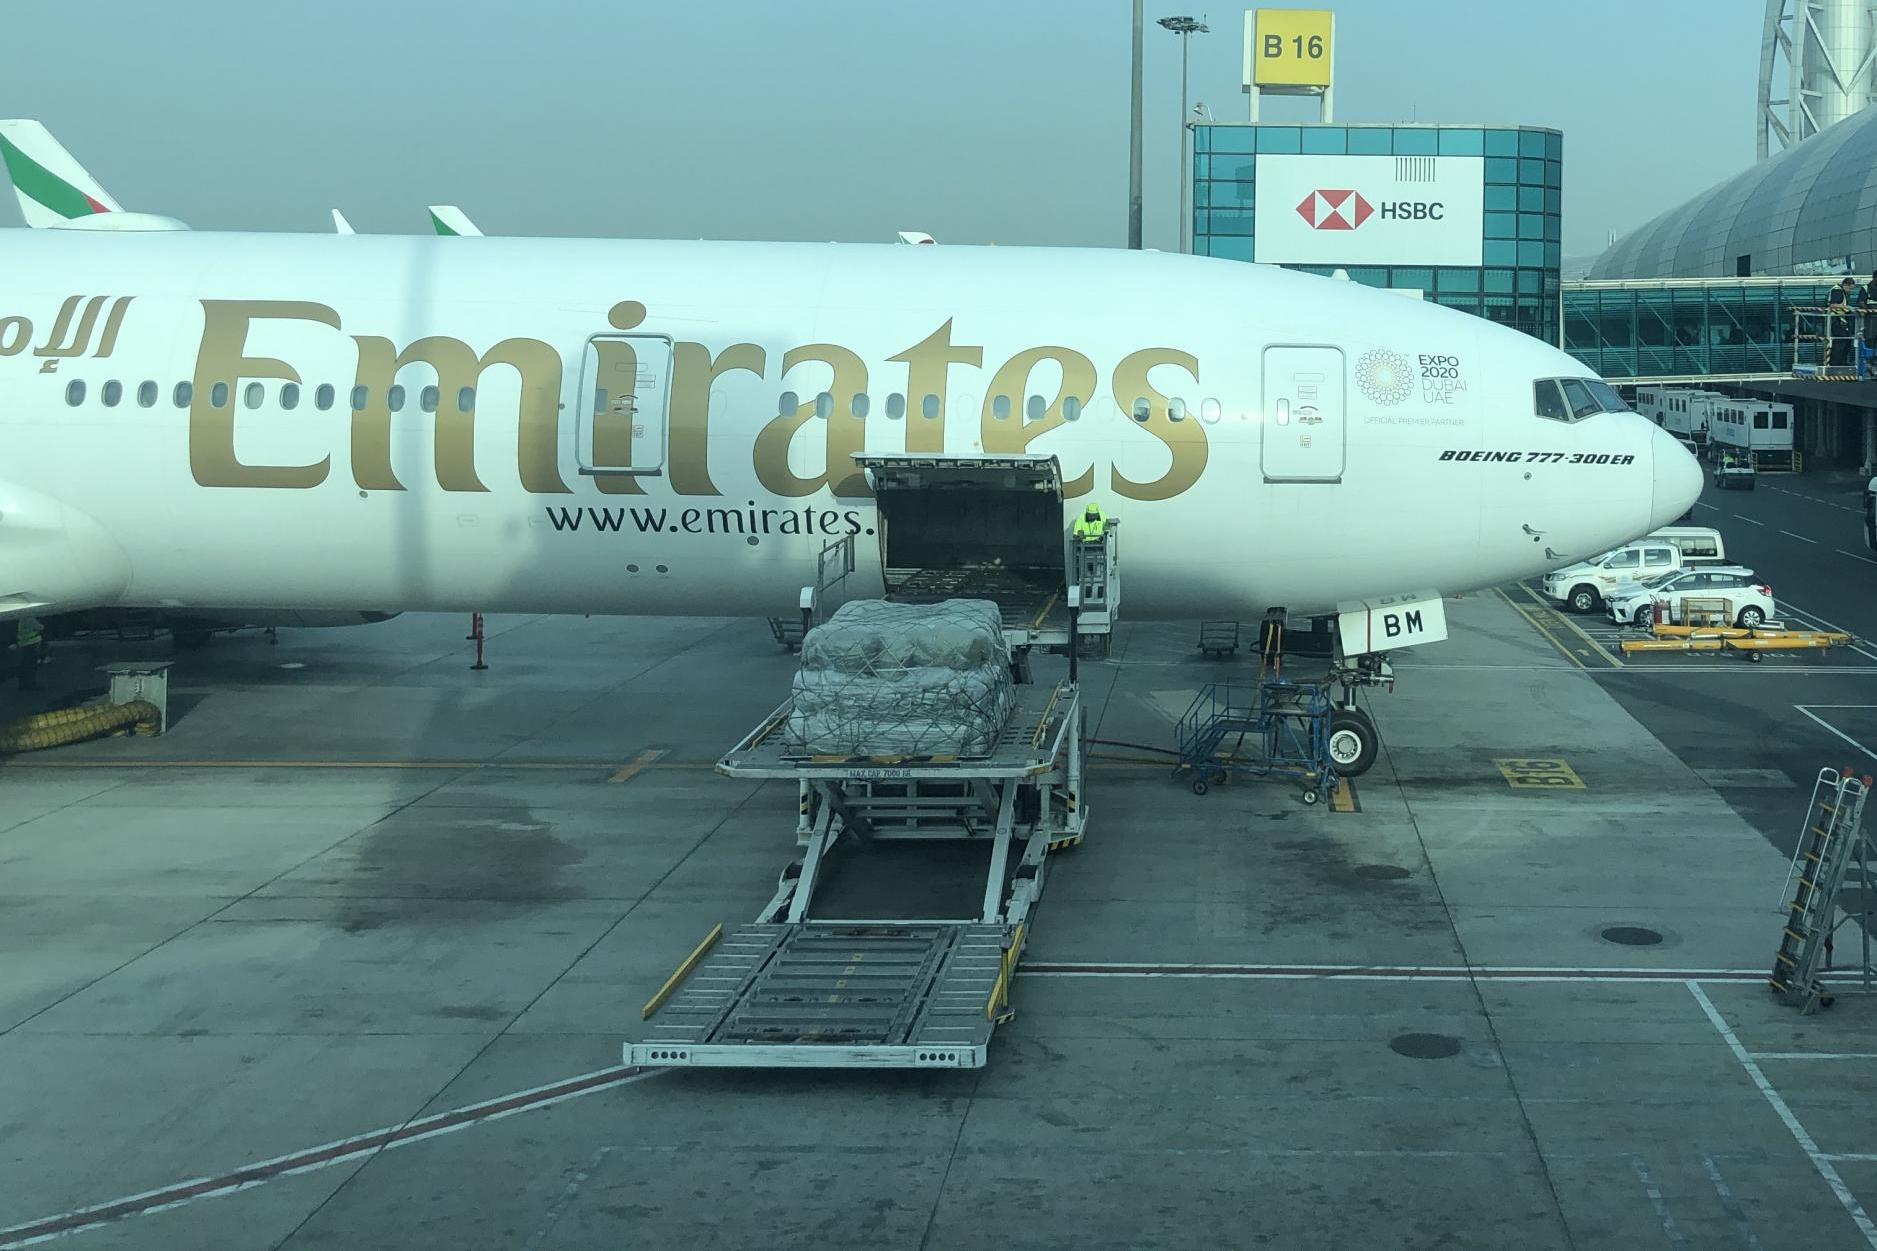 Cash back: Emirates is now offering full refunds for passengers worldwide whose flights have been cancelled as a result of the UAE flight ban